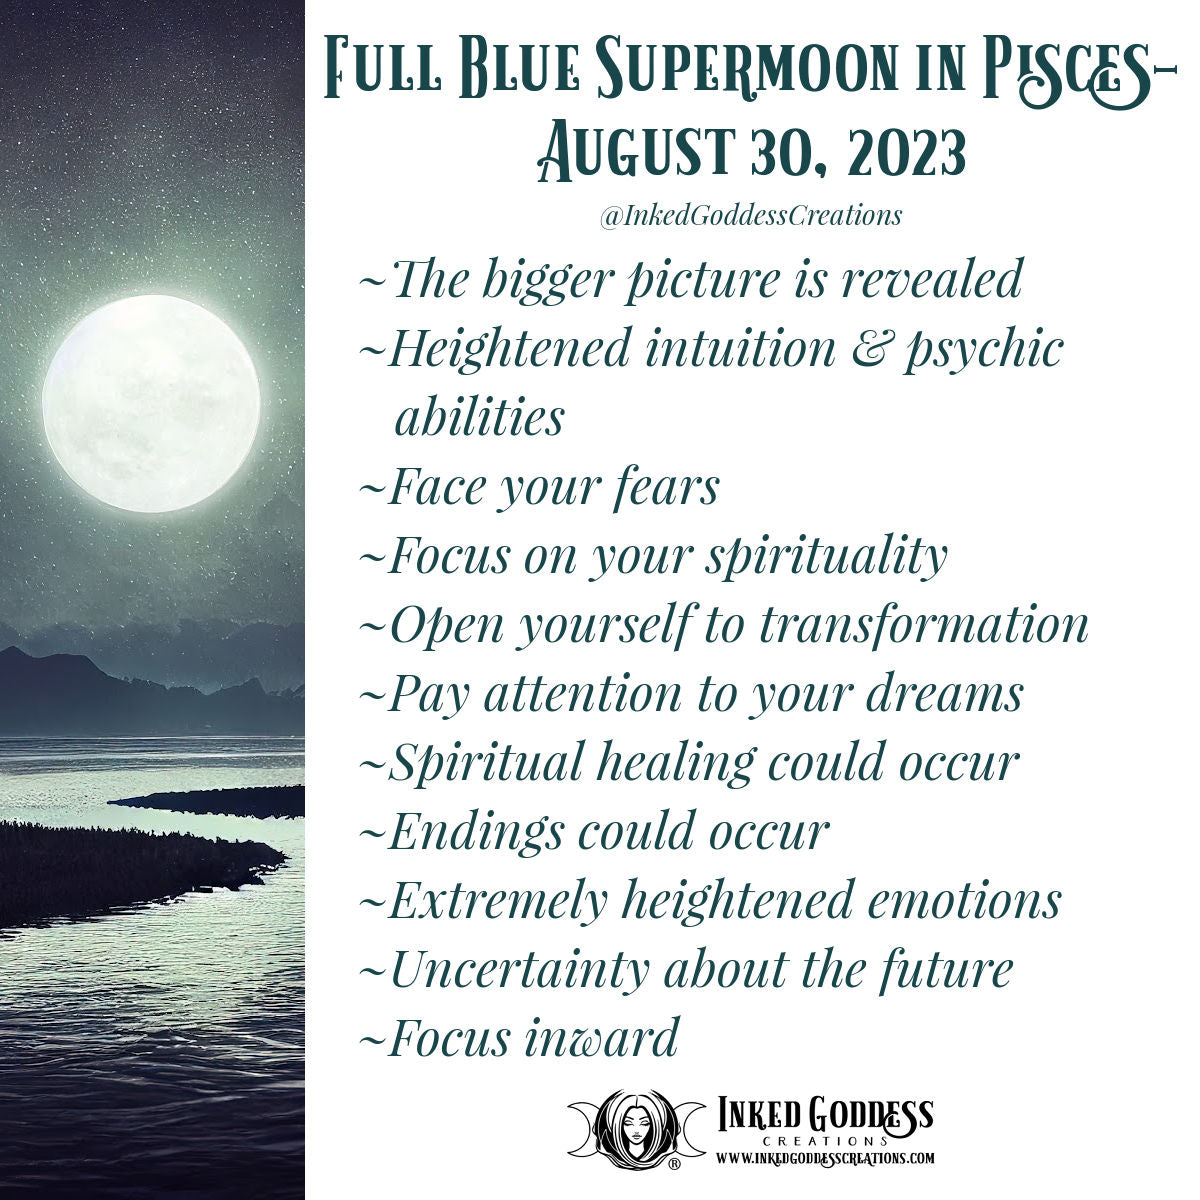 Full Blue Supermoon in Pisces- August 30, 2023